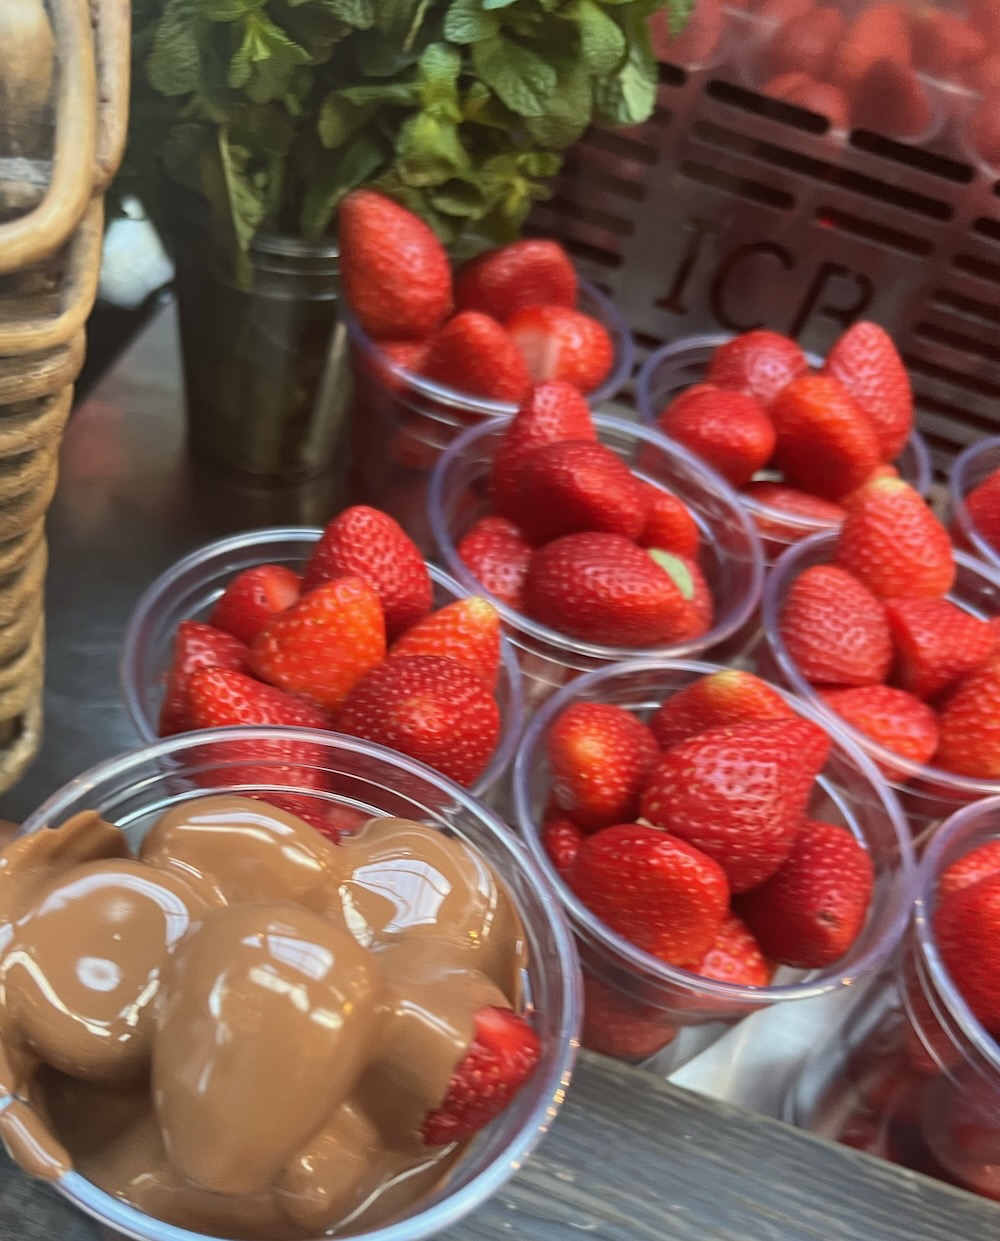 Strawberries covered with Chocolate in Borough Market in London. Photo Credit: © Ursula Petula Barzey.